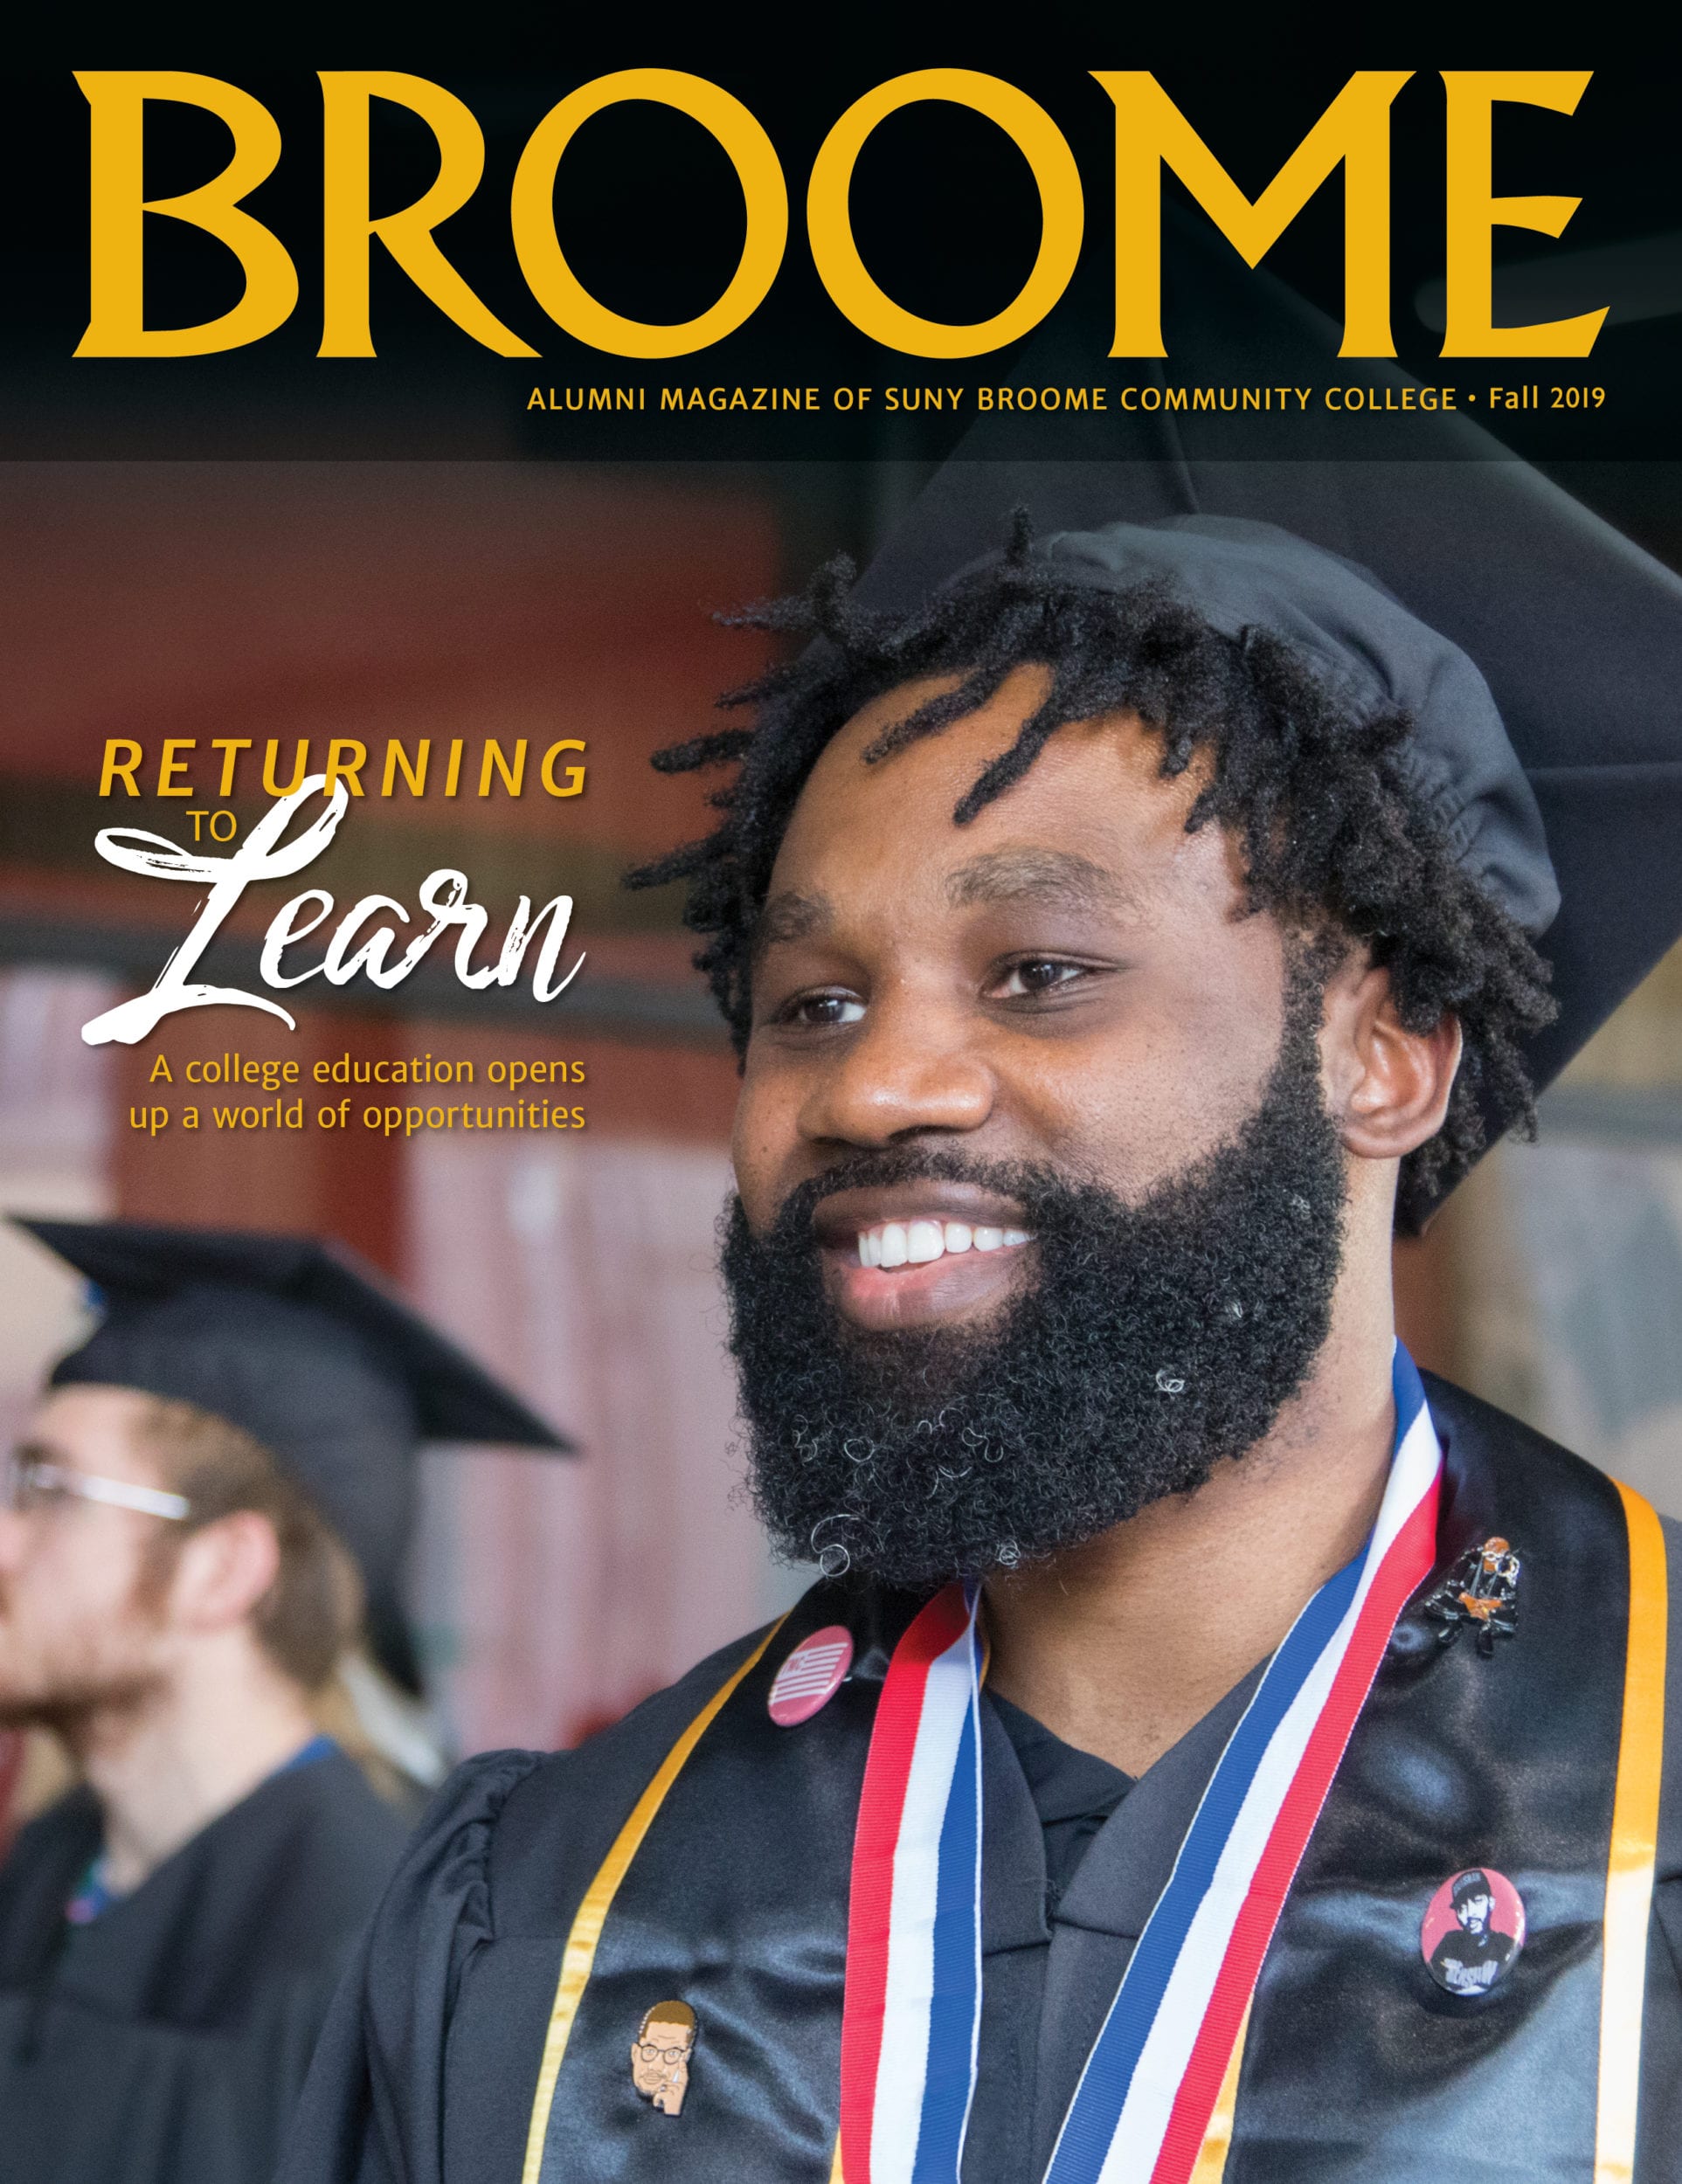 The cover of the latest edition of Broome Magazine